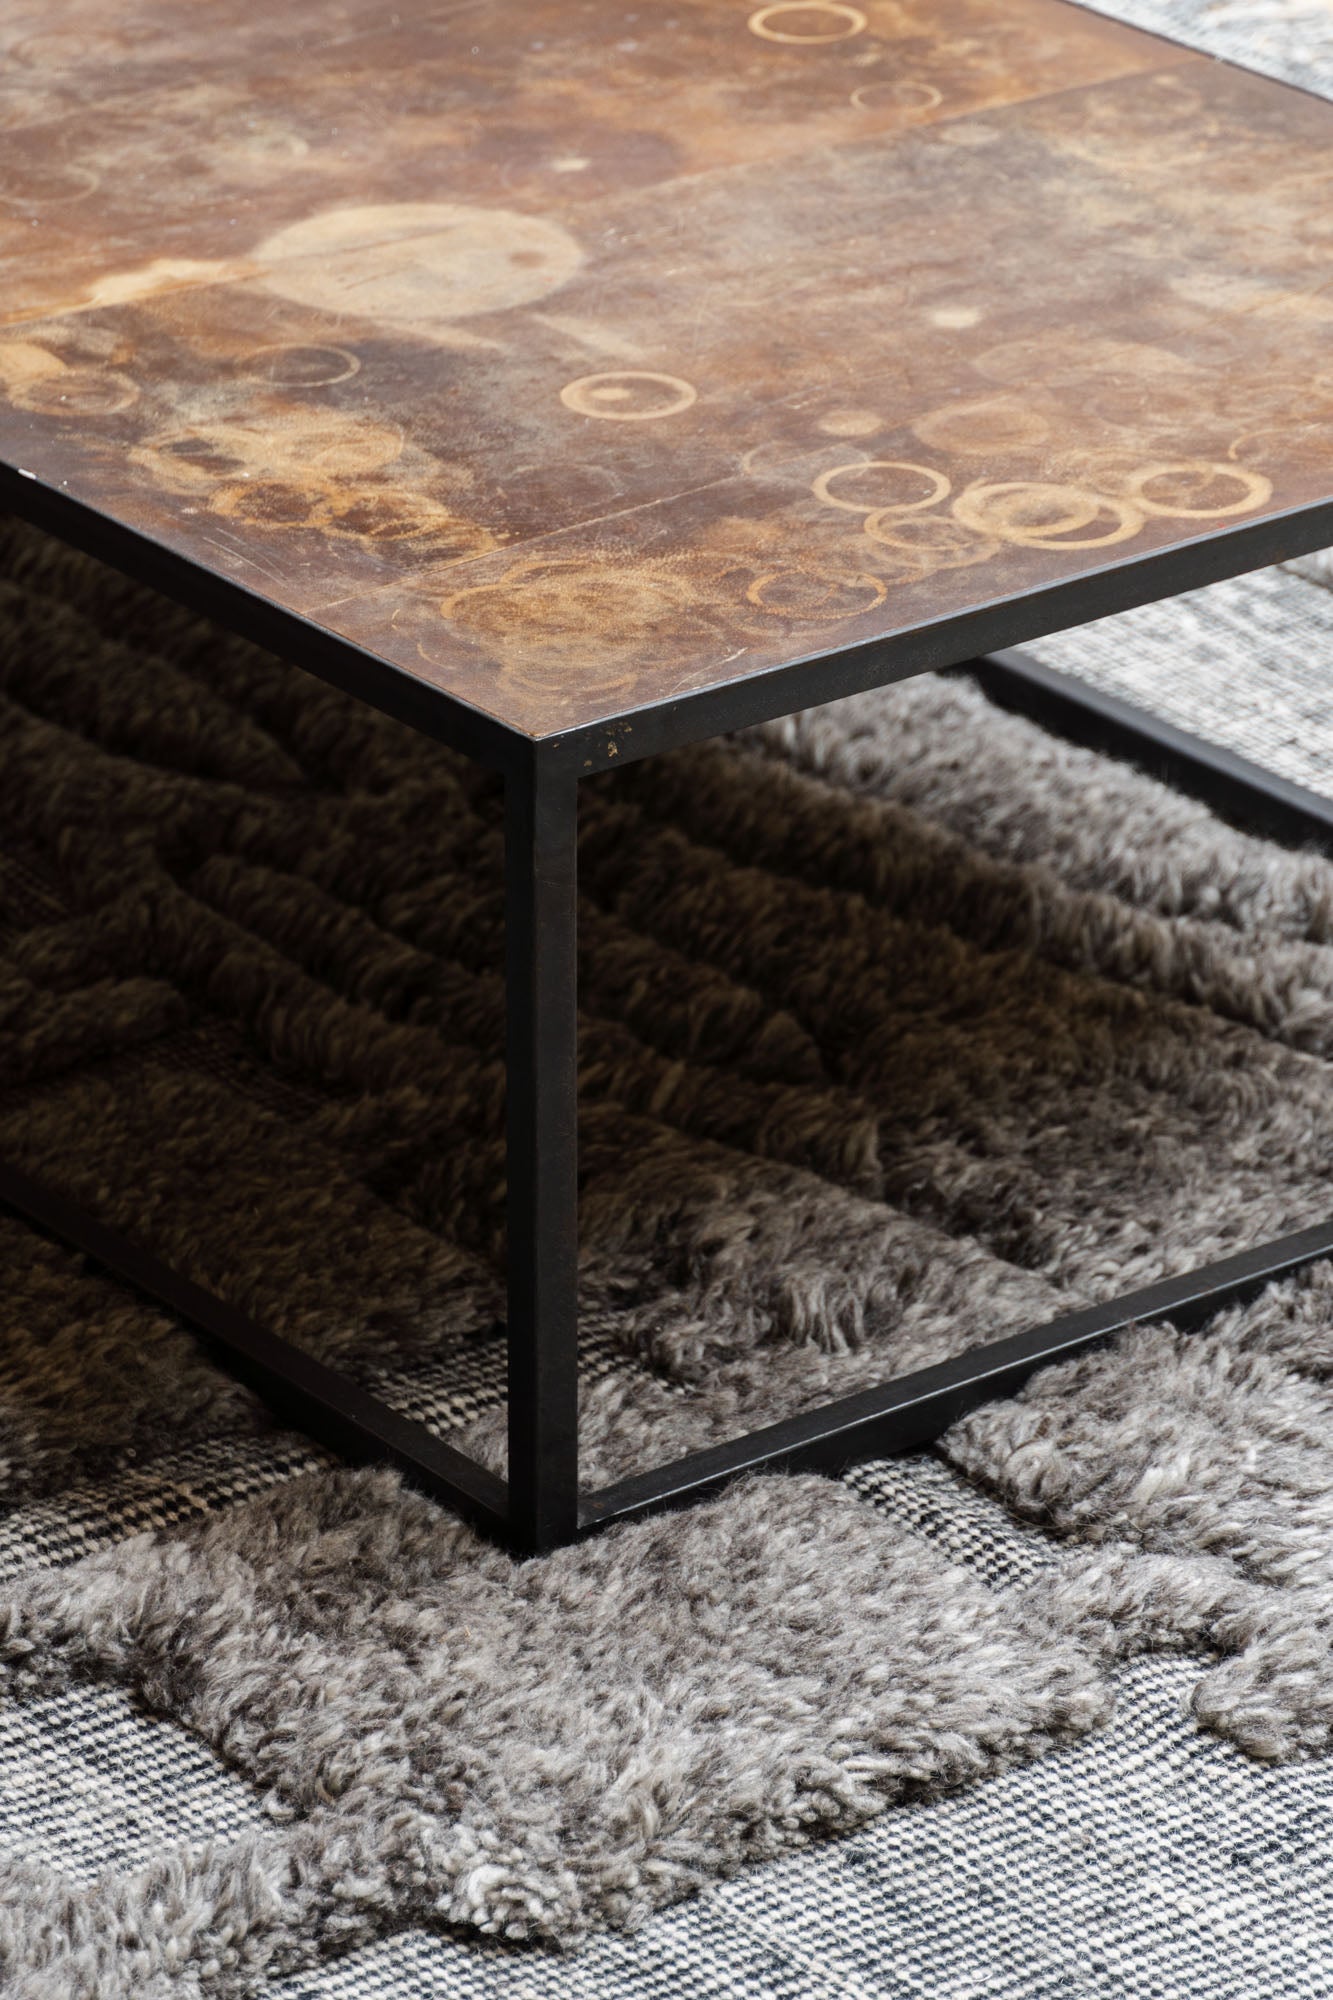 Close up of the Mesa Coffee Table by Heerenhuis set on a handwoven rug by Cappelen Dimyr.